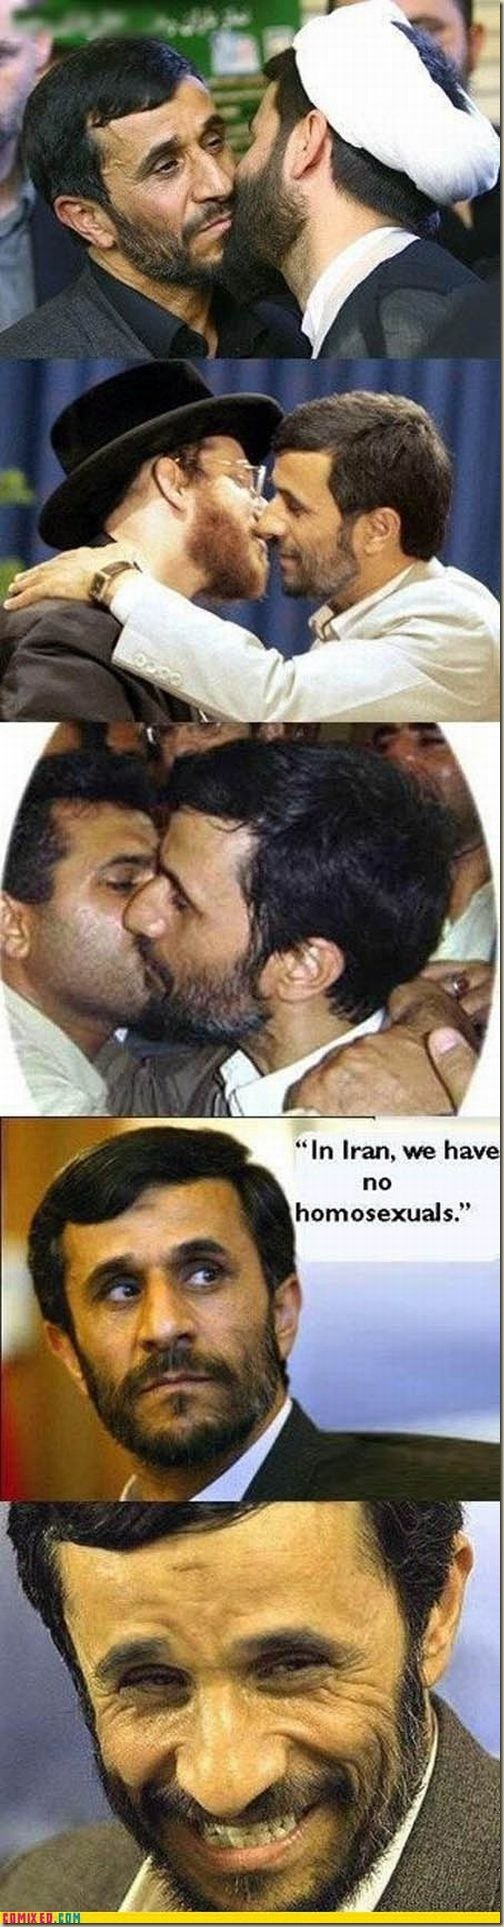 In Iran There Are no Homosexuals. Guess not,,,&lt;br /&gt; Thumb if you laughed.